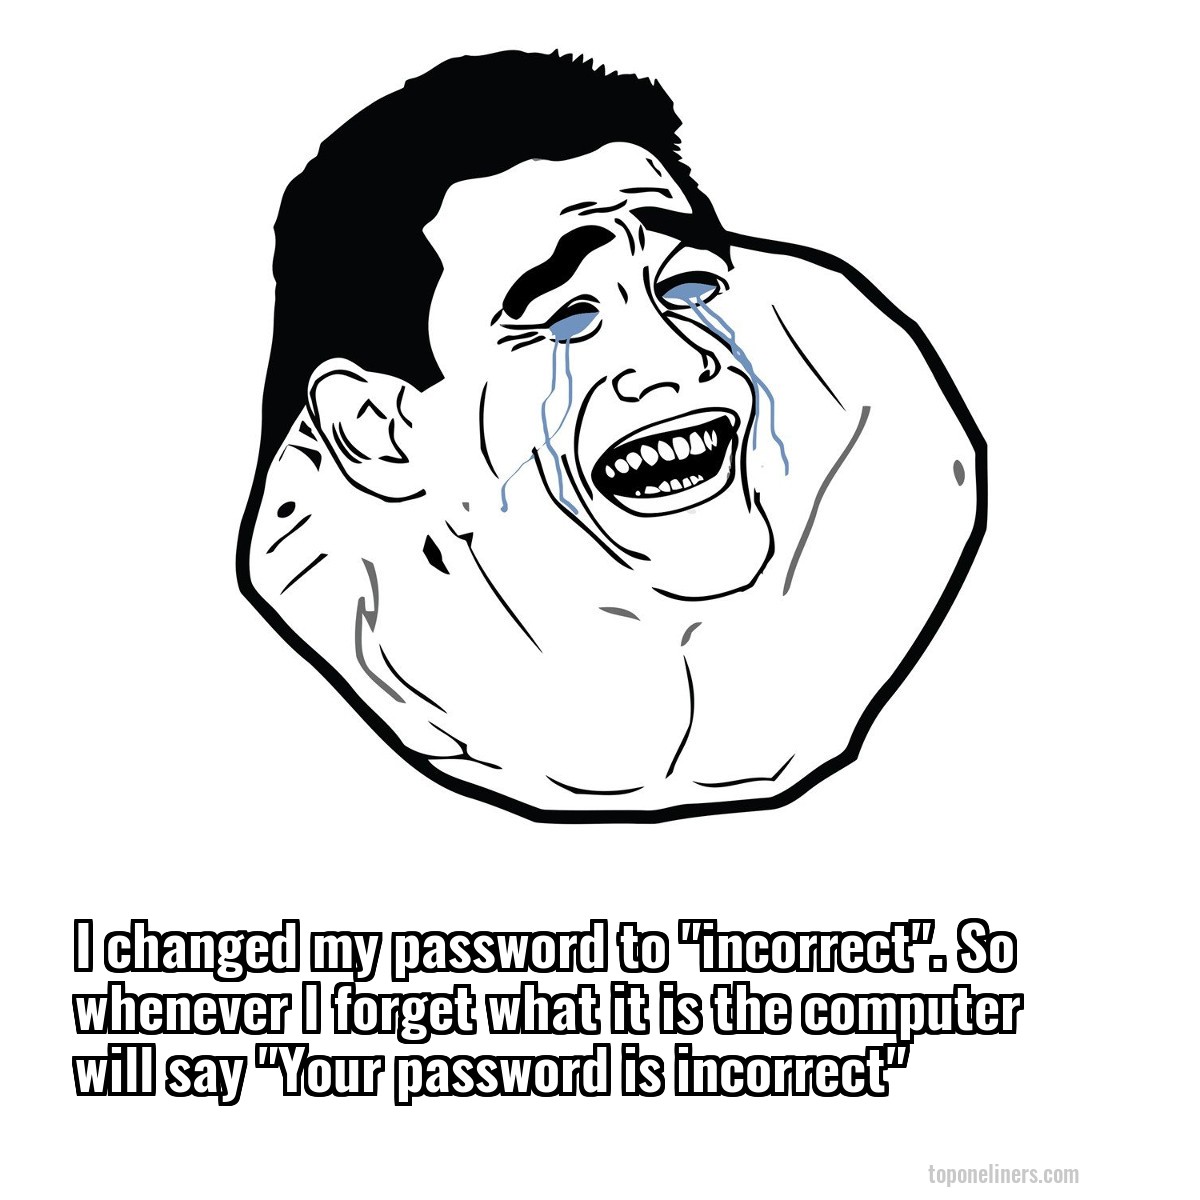 I changed my password to "incorrect". So whenever I forget what it is the computer will say "Your password is incorrect"